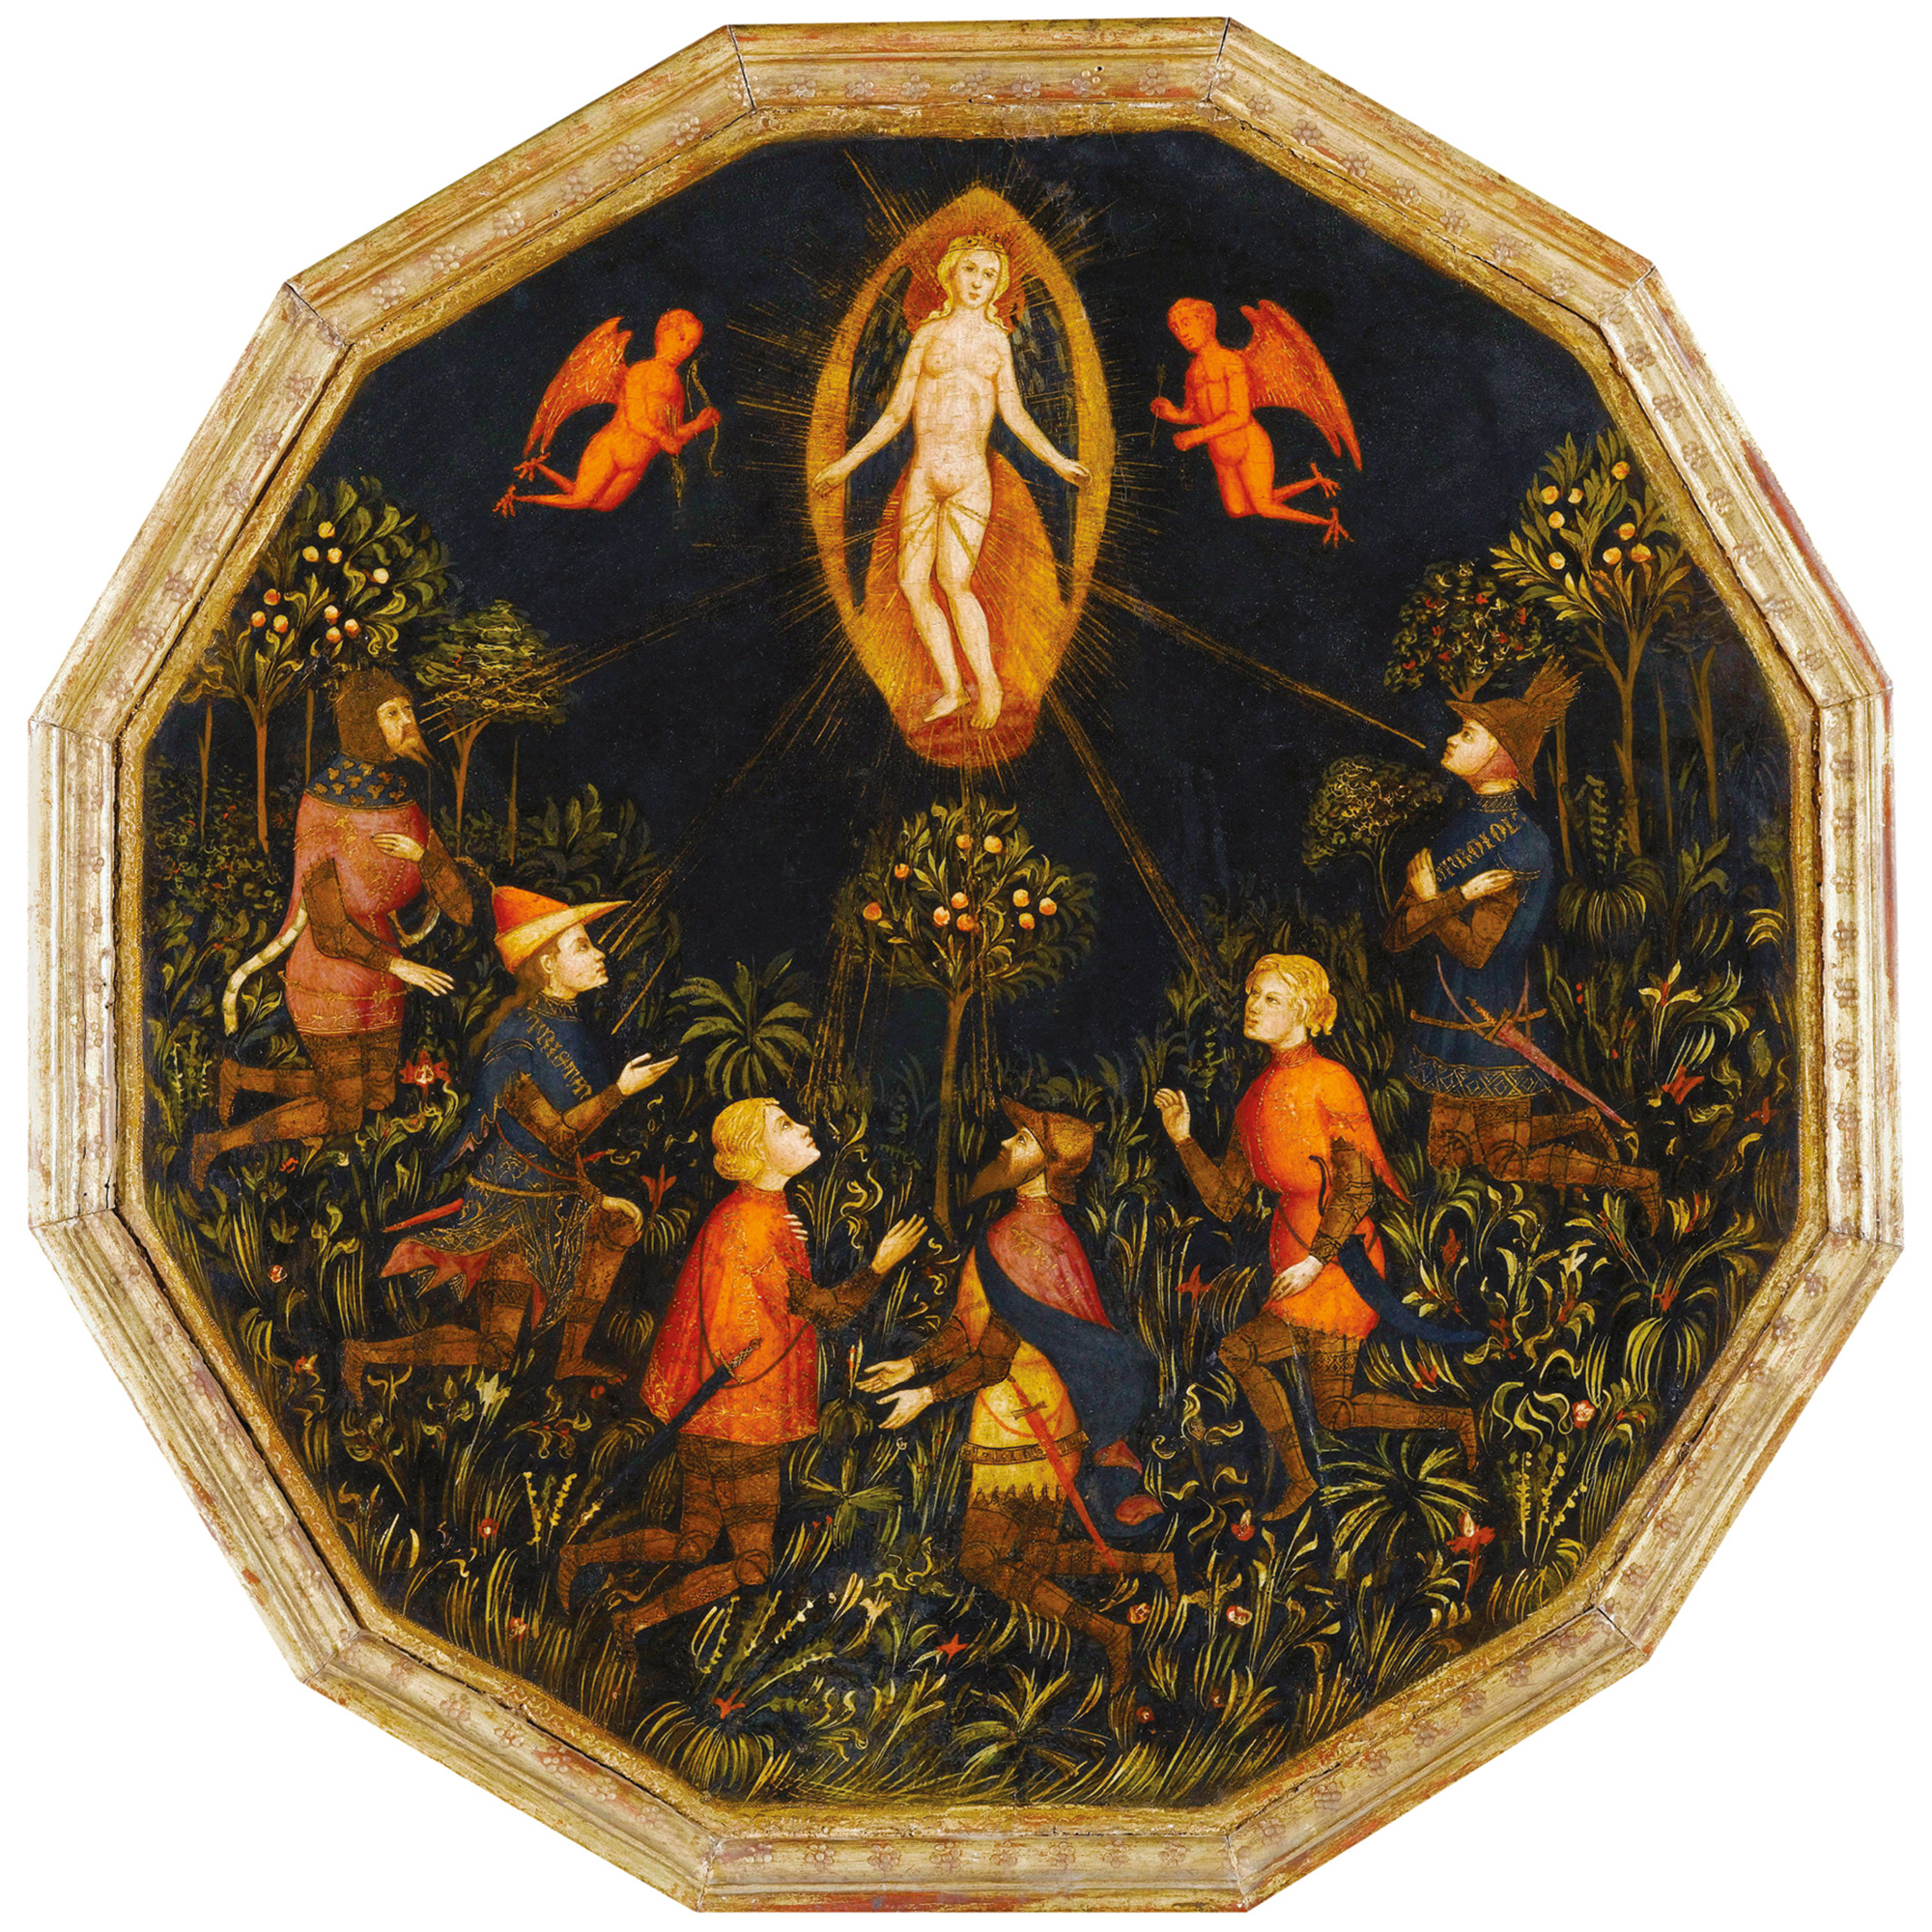 A circa fourteen hundred Italian birth tray depicting Venus radiating rays of light, by Master of Charles of Durazzo. 